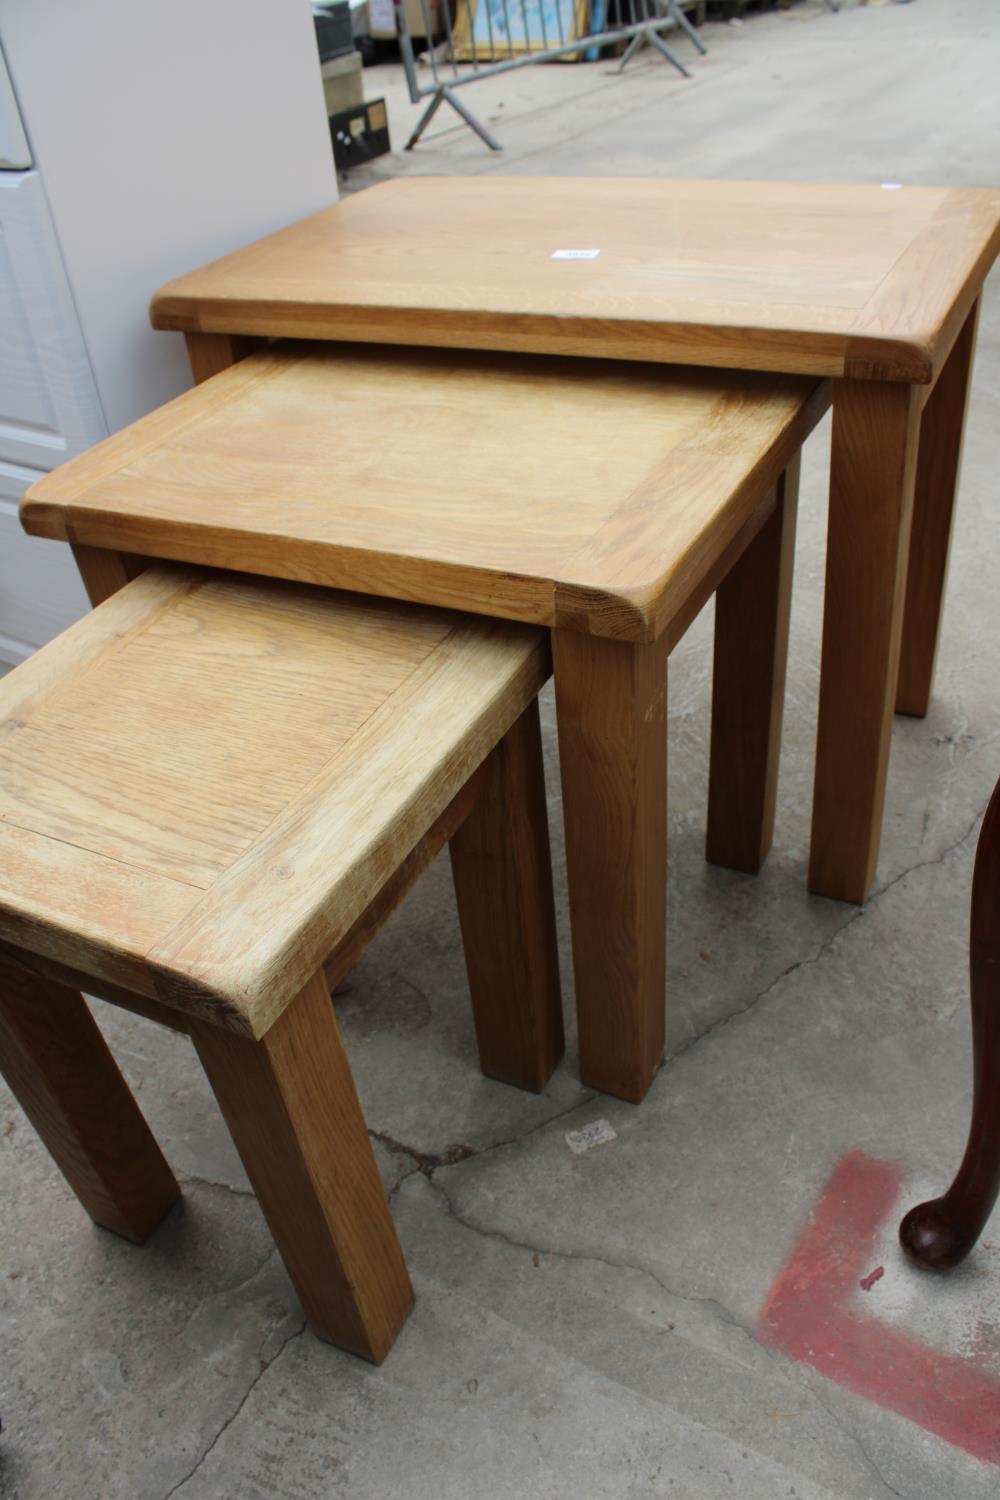 A MODERN OAK NEST OF THREE TABLES - Image 3 of 3